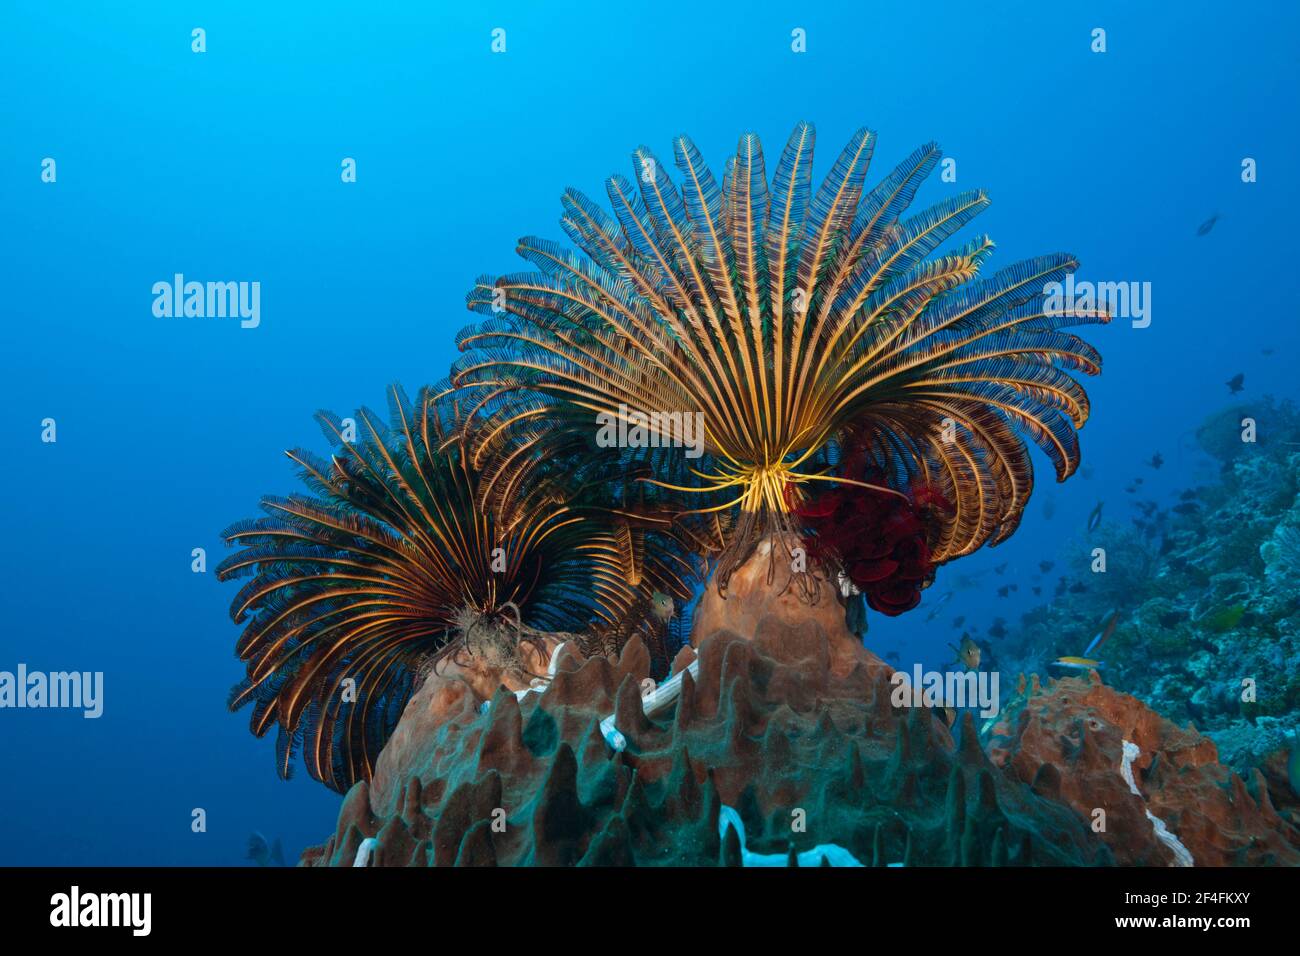 Feather stars in the current (Comaster) schlegeli, Tanimbar Islands, Moluccas, Indonesia Stock Photo